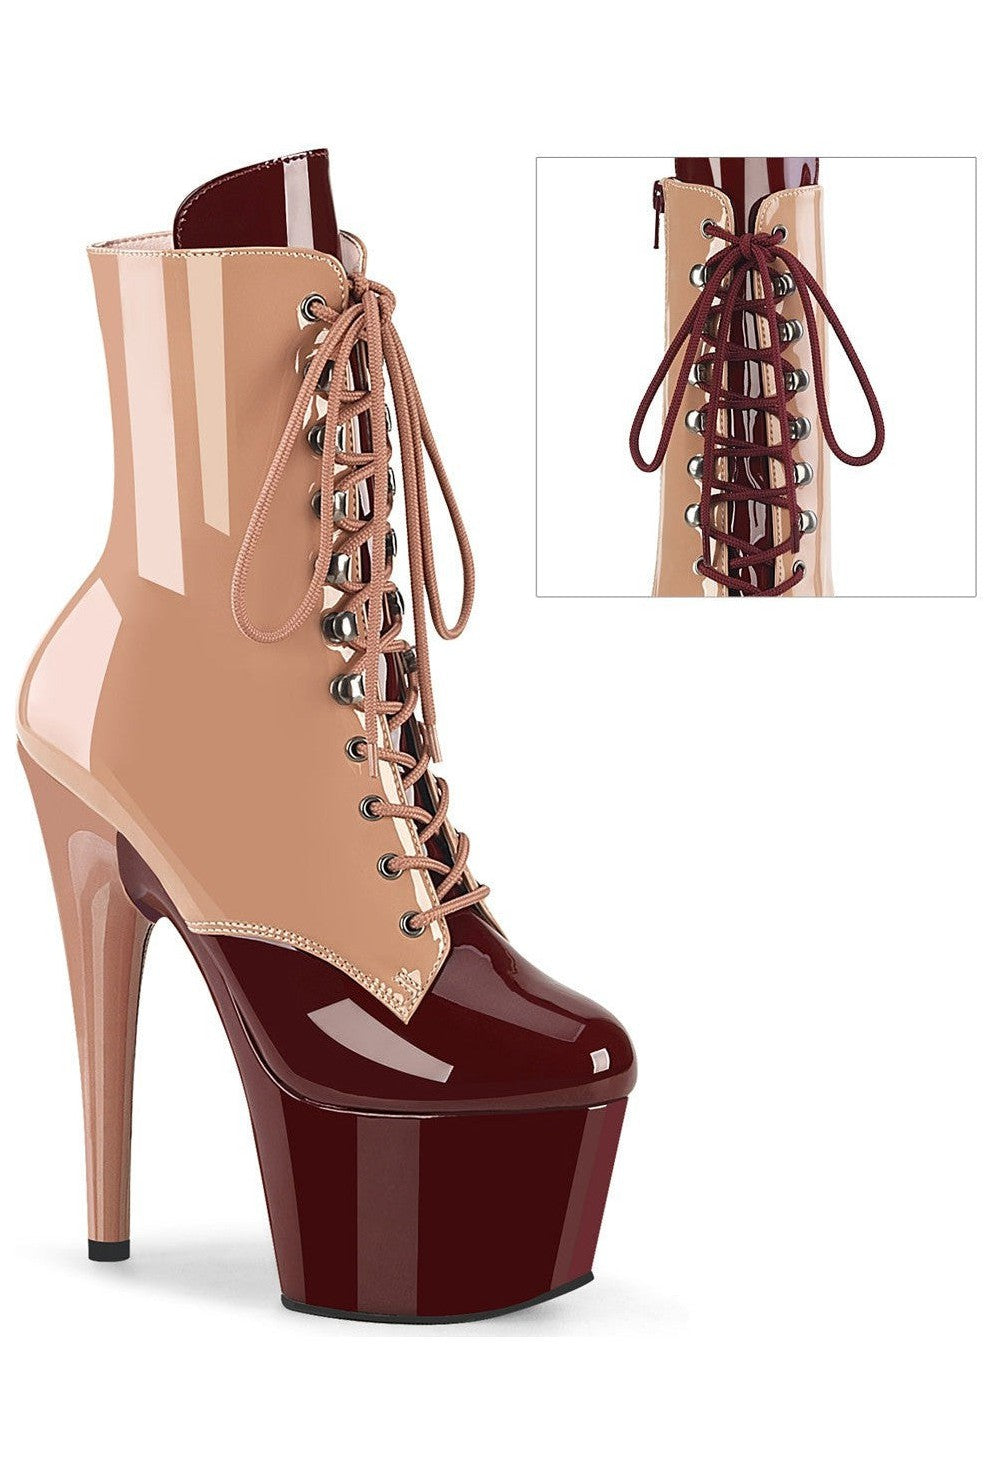 Pleaser Blush Ankle Boots Platform Stripper Shoes | Buy at Sexyshoes.com